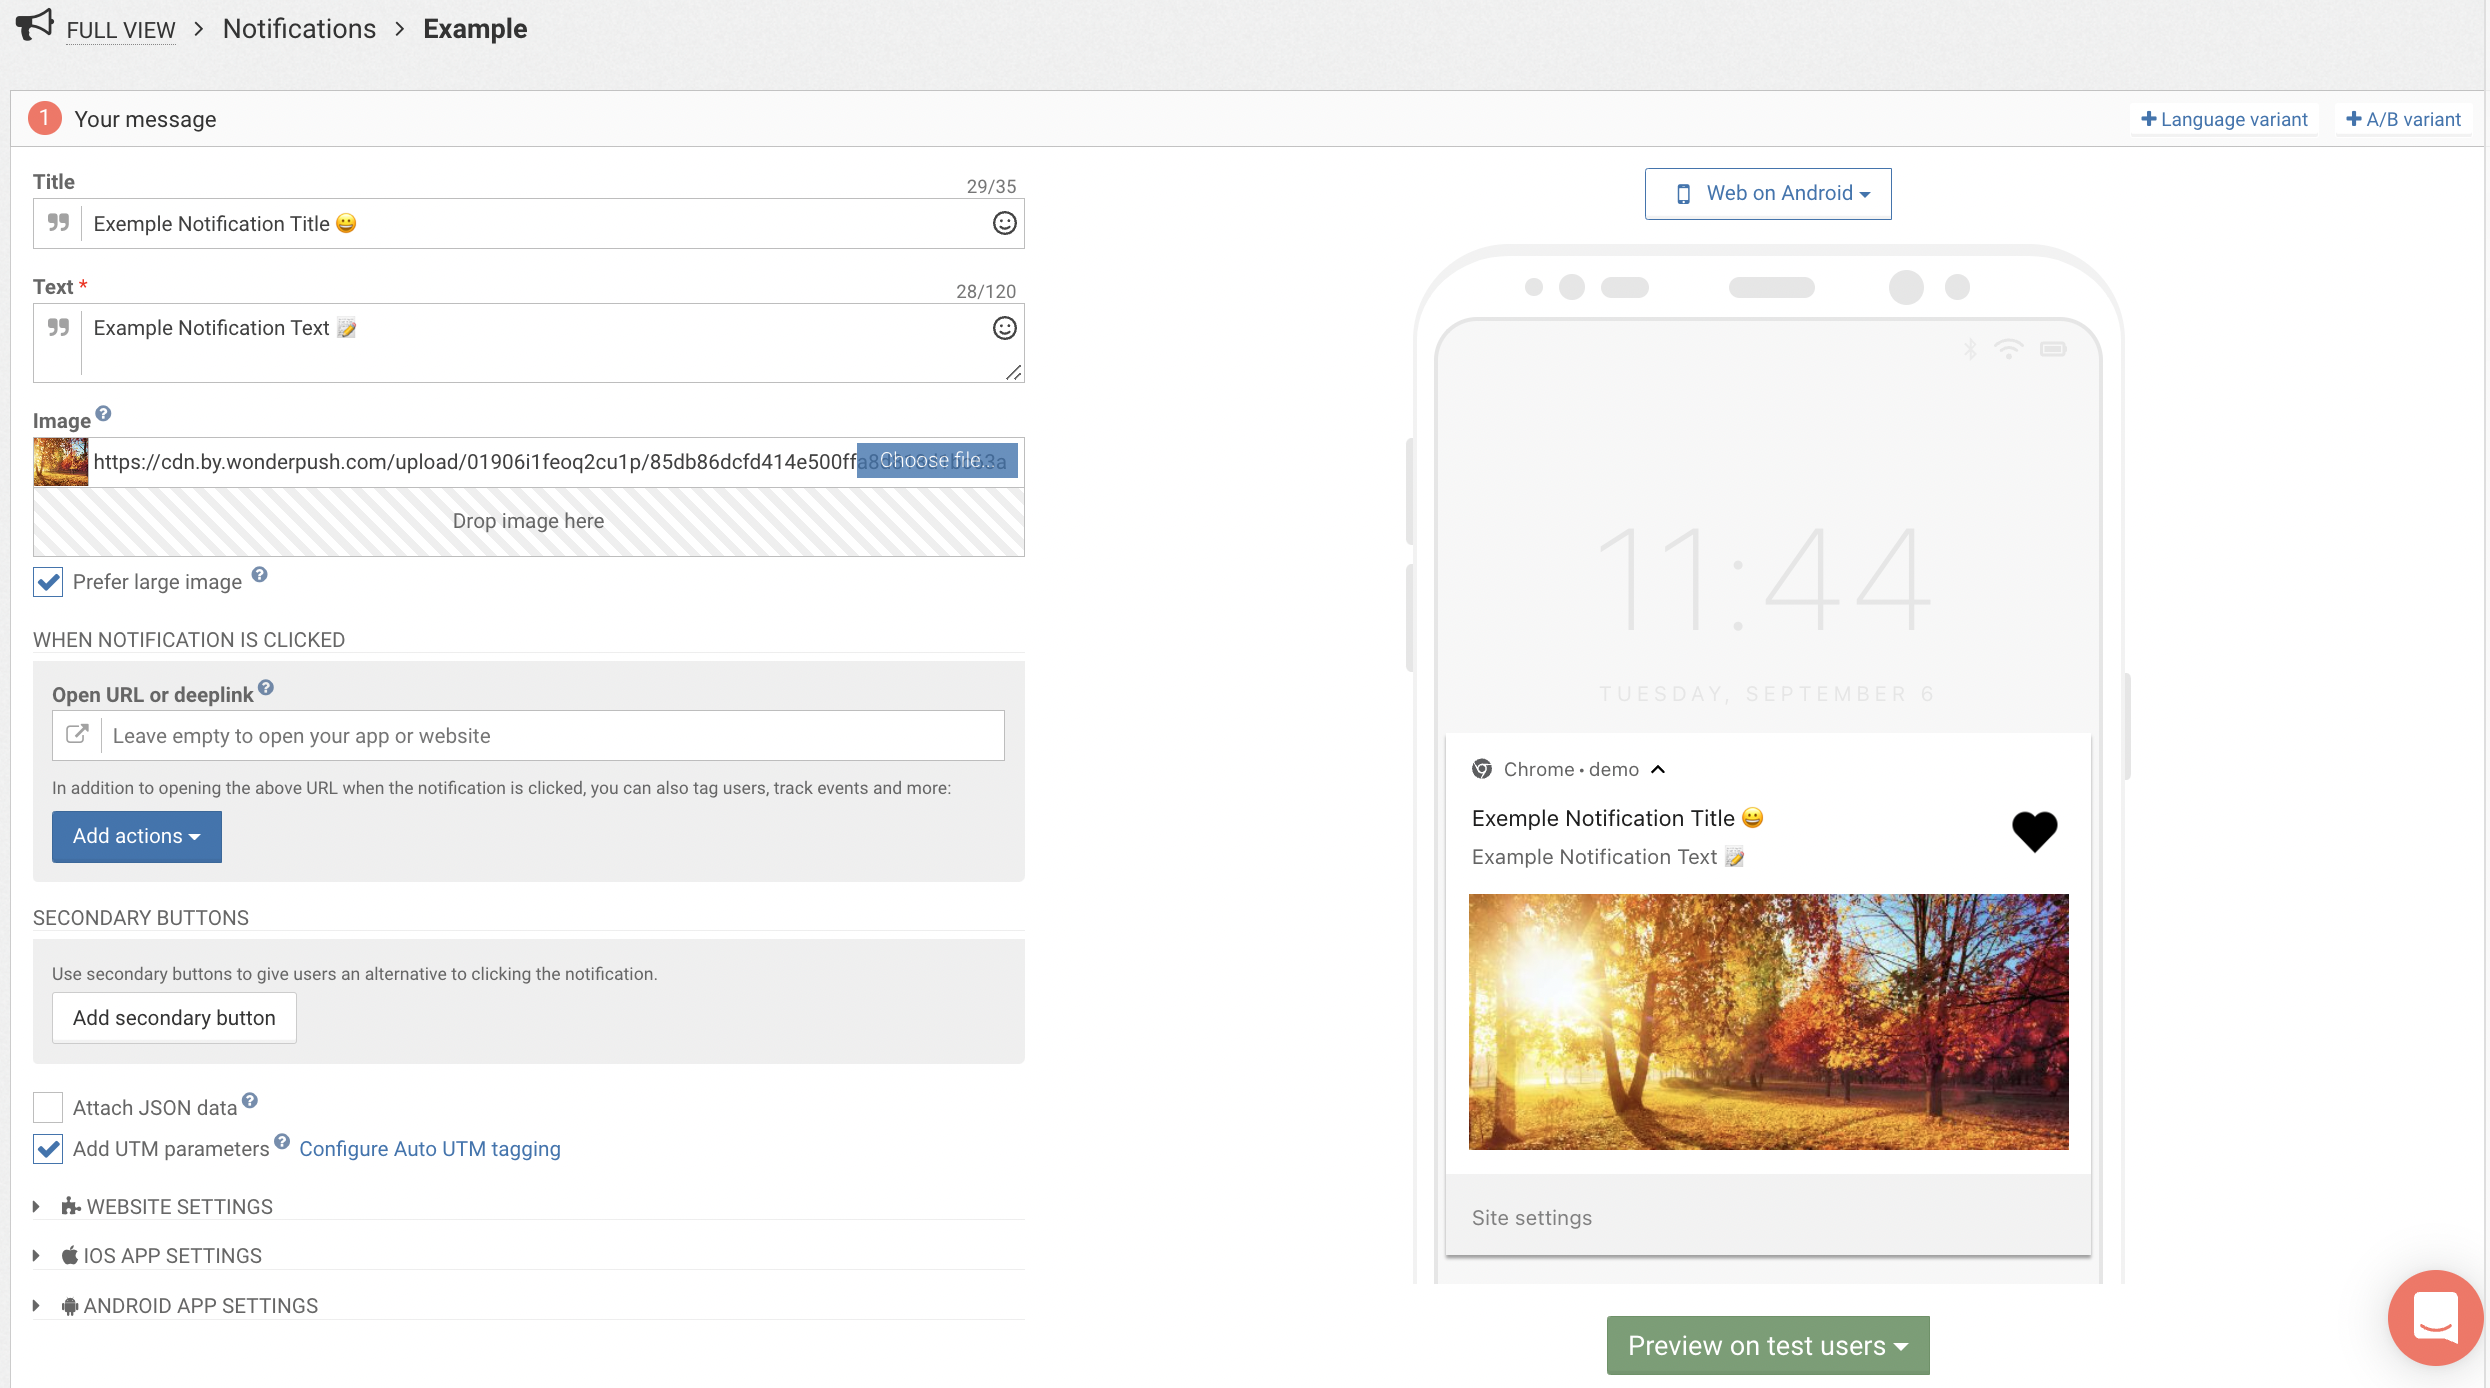 A WYSIWYG Campaign tool which lets you easily create push notification and in-app campaigns